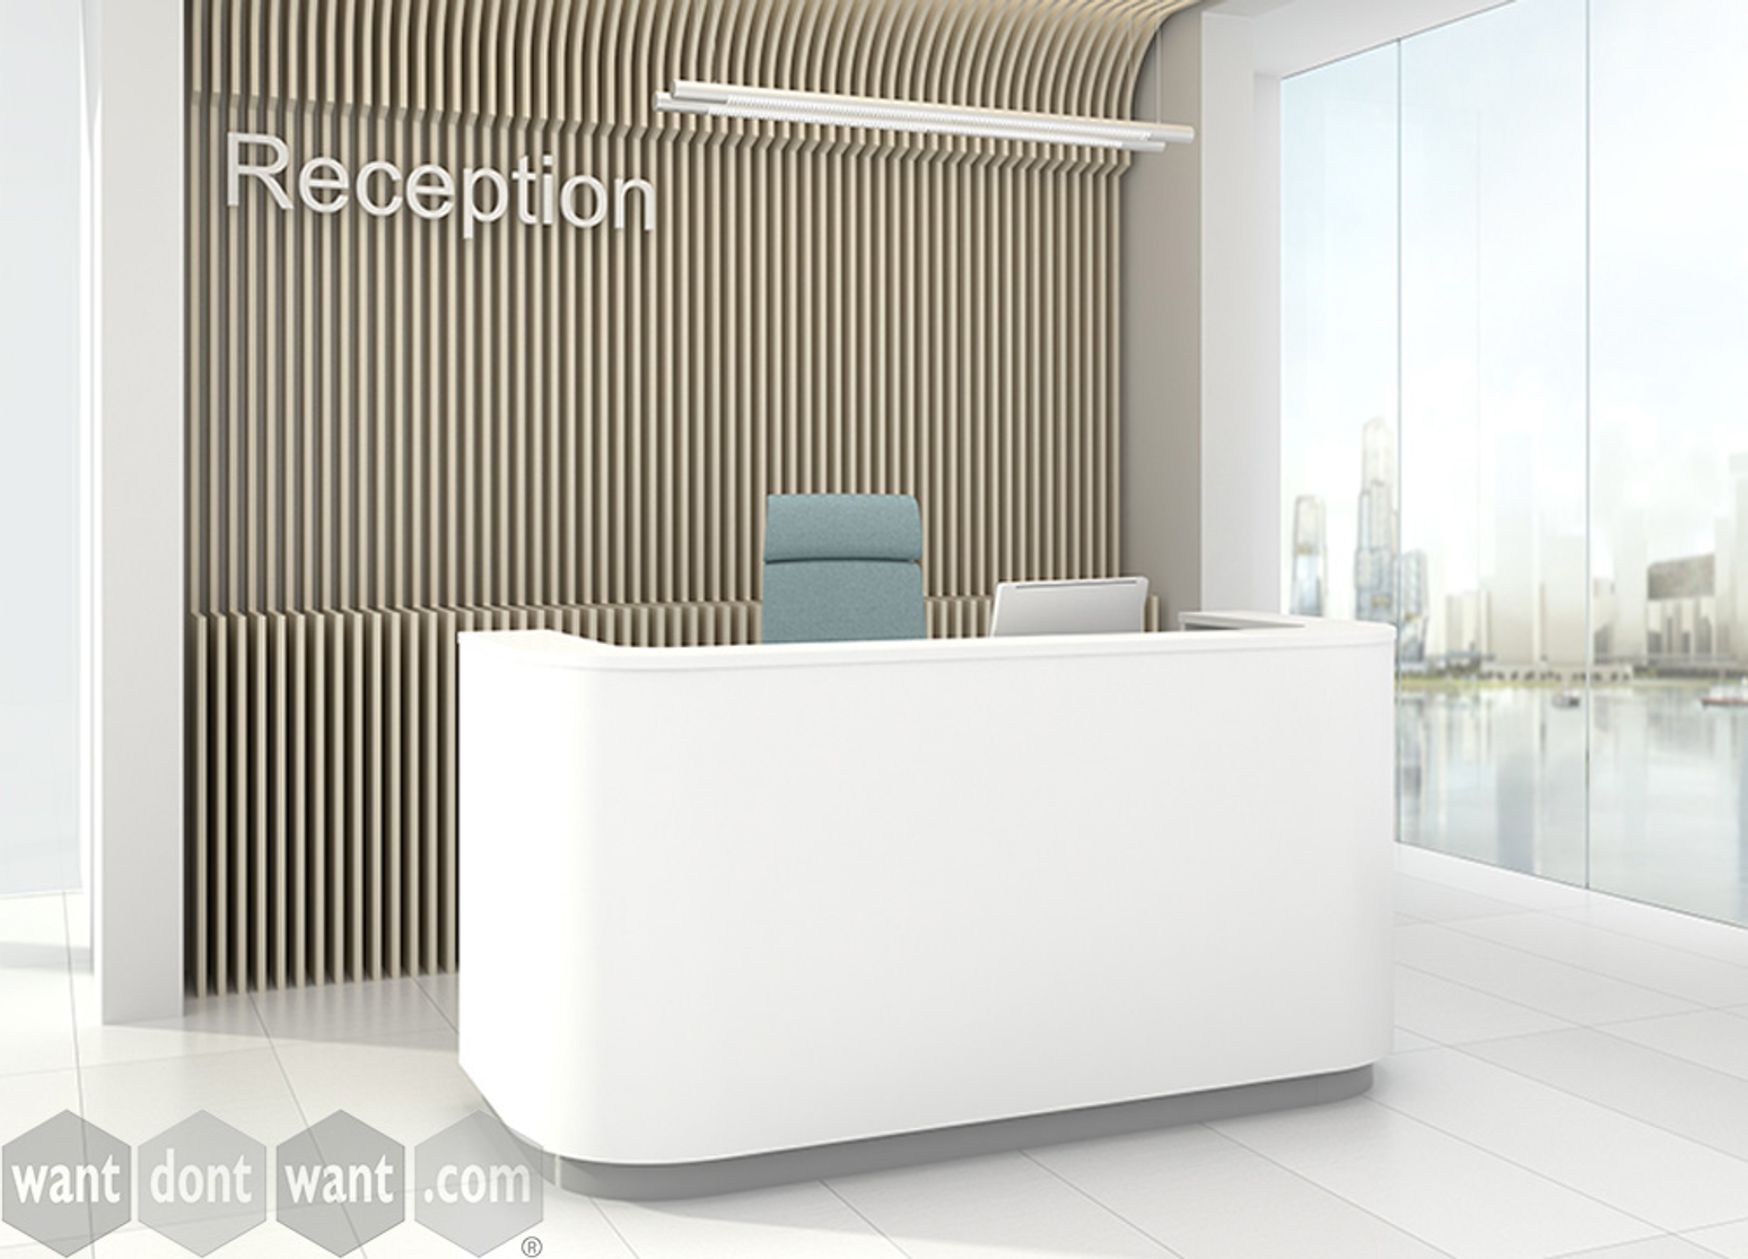 Want Dont : New Office Furniture | Reception | Modern contemporary  design reception desk